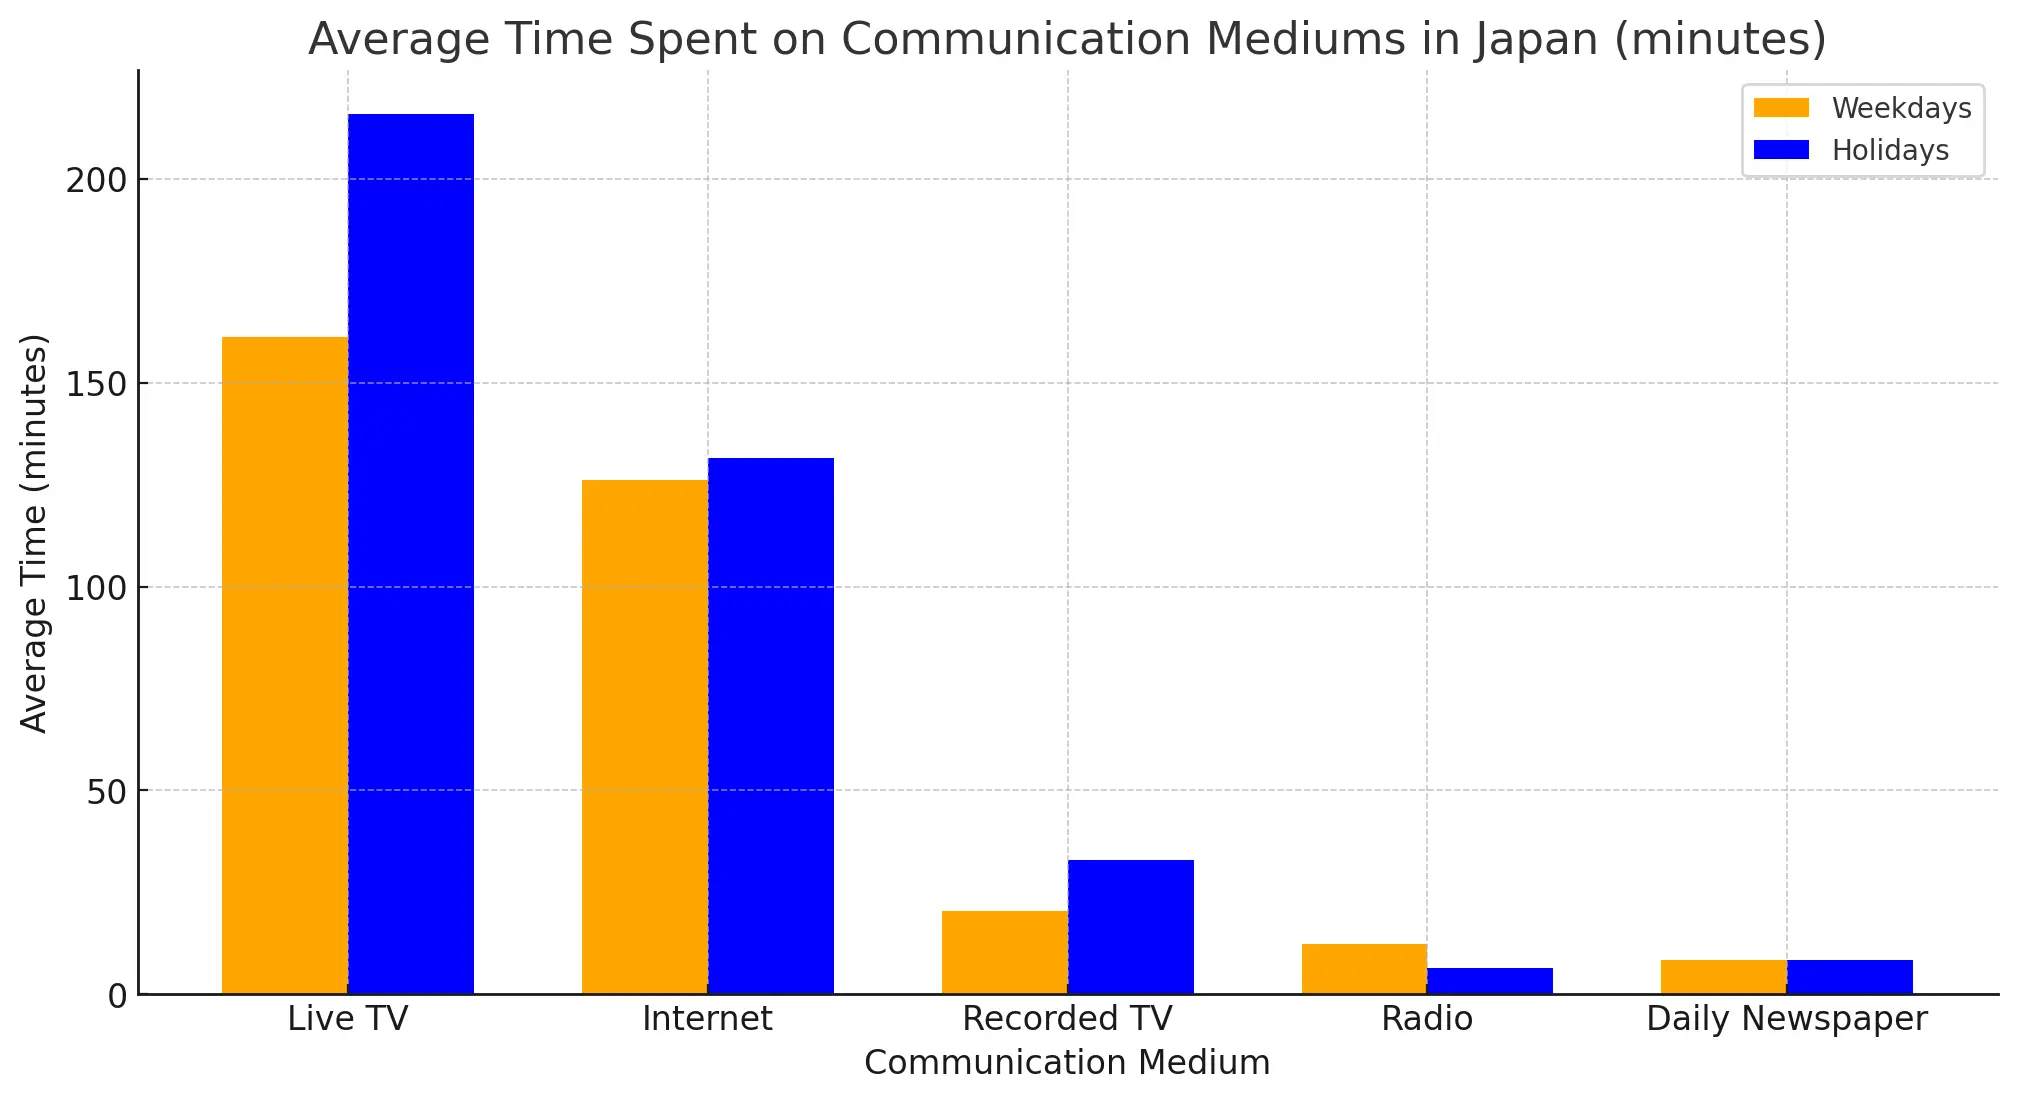 Average time spent on different mediums in Japan